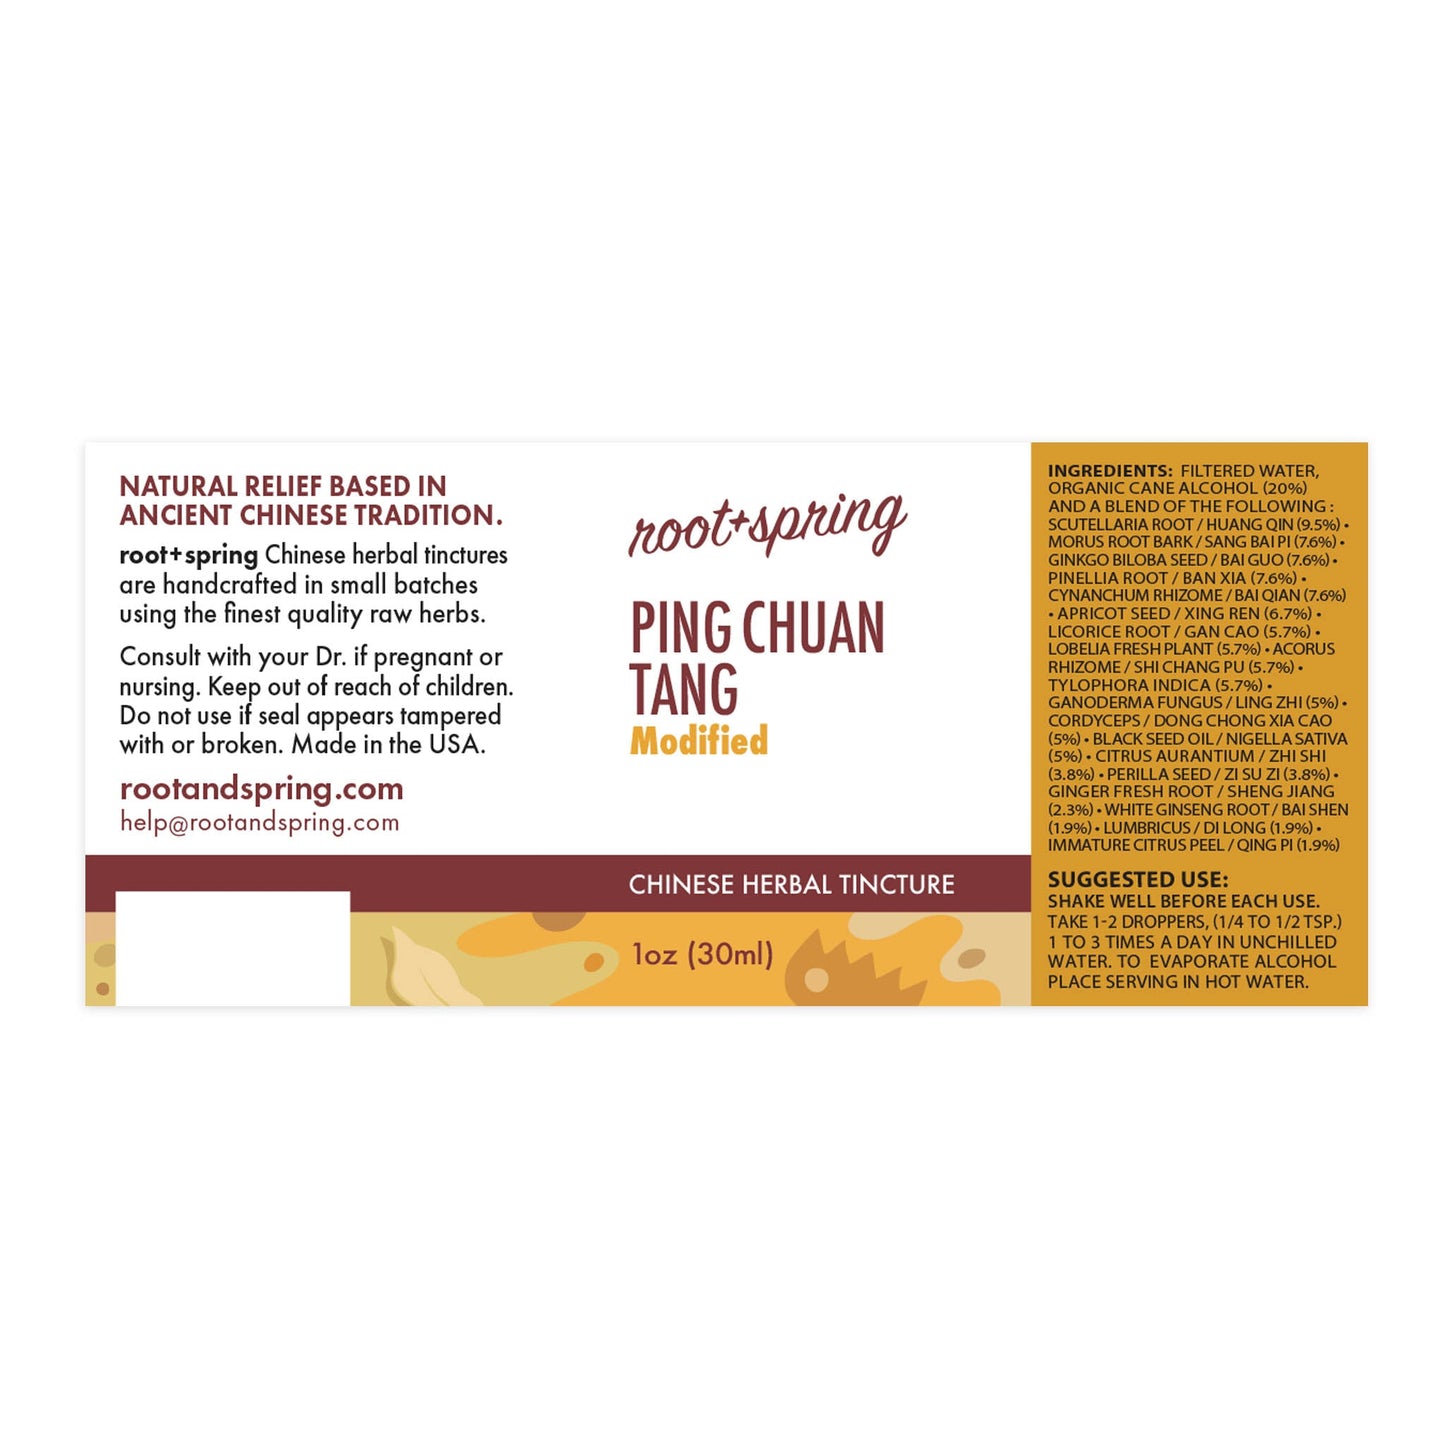 Label for Ping Chuan Tang (modified) - Herbal Tincture by root + spring